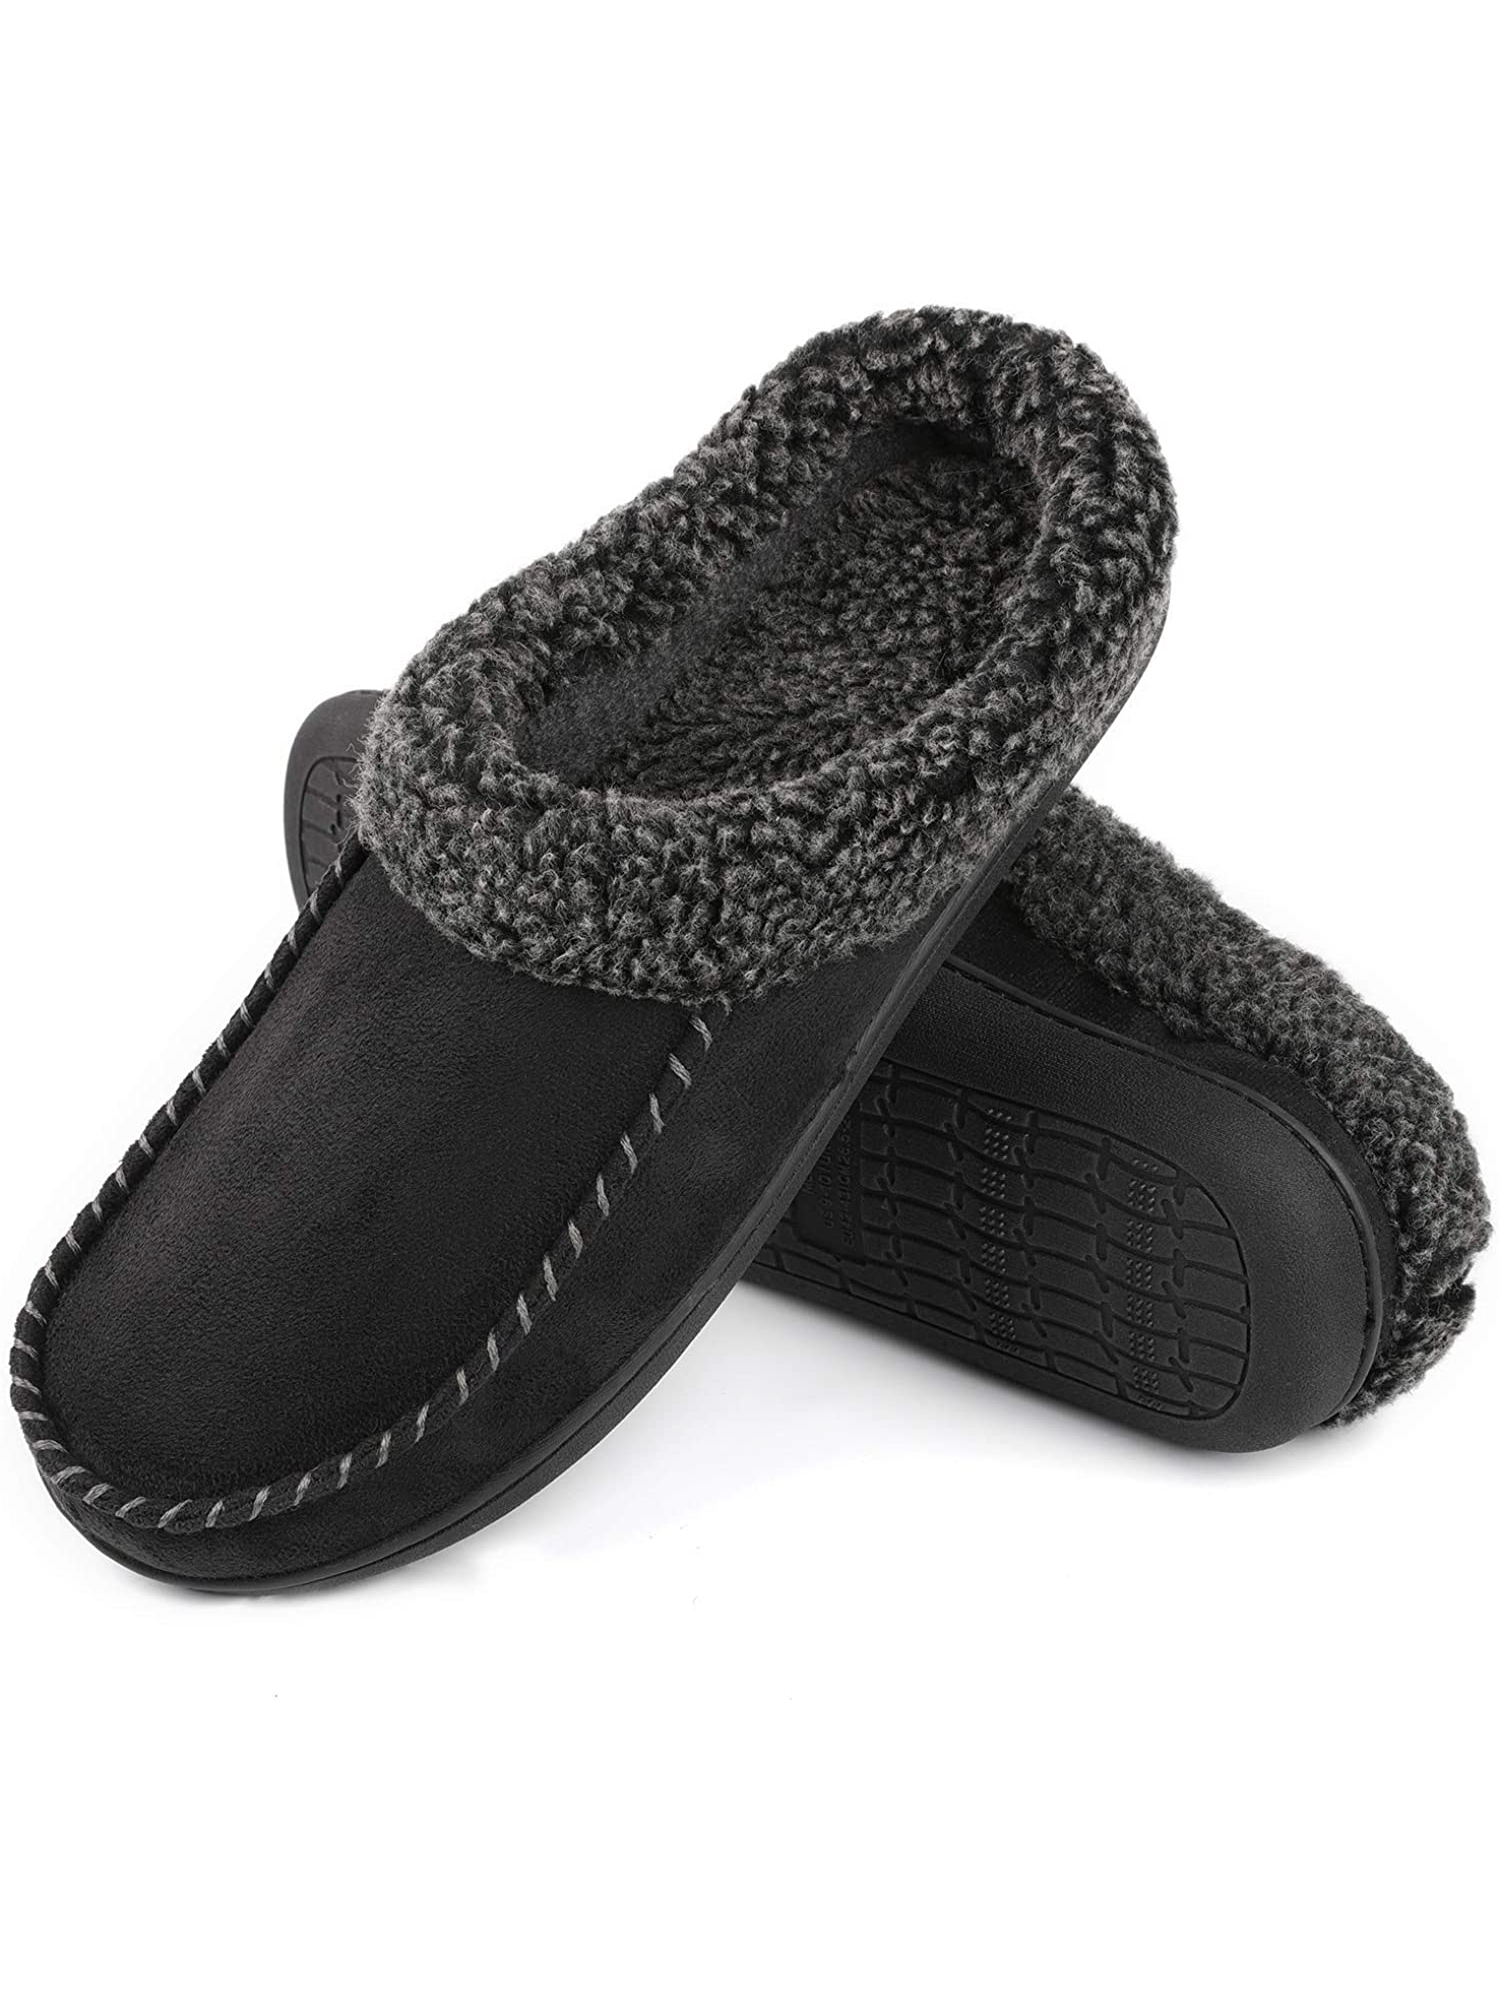 Men's Cozy Memory Foam Moccasin Suede Slippers with Fuzzy Plush Wool-Like Lining, Slip on Mules Clogs House Shoes with Indoor Outdoor Anti-Skid Rubber Sole - image 4 of 6